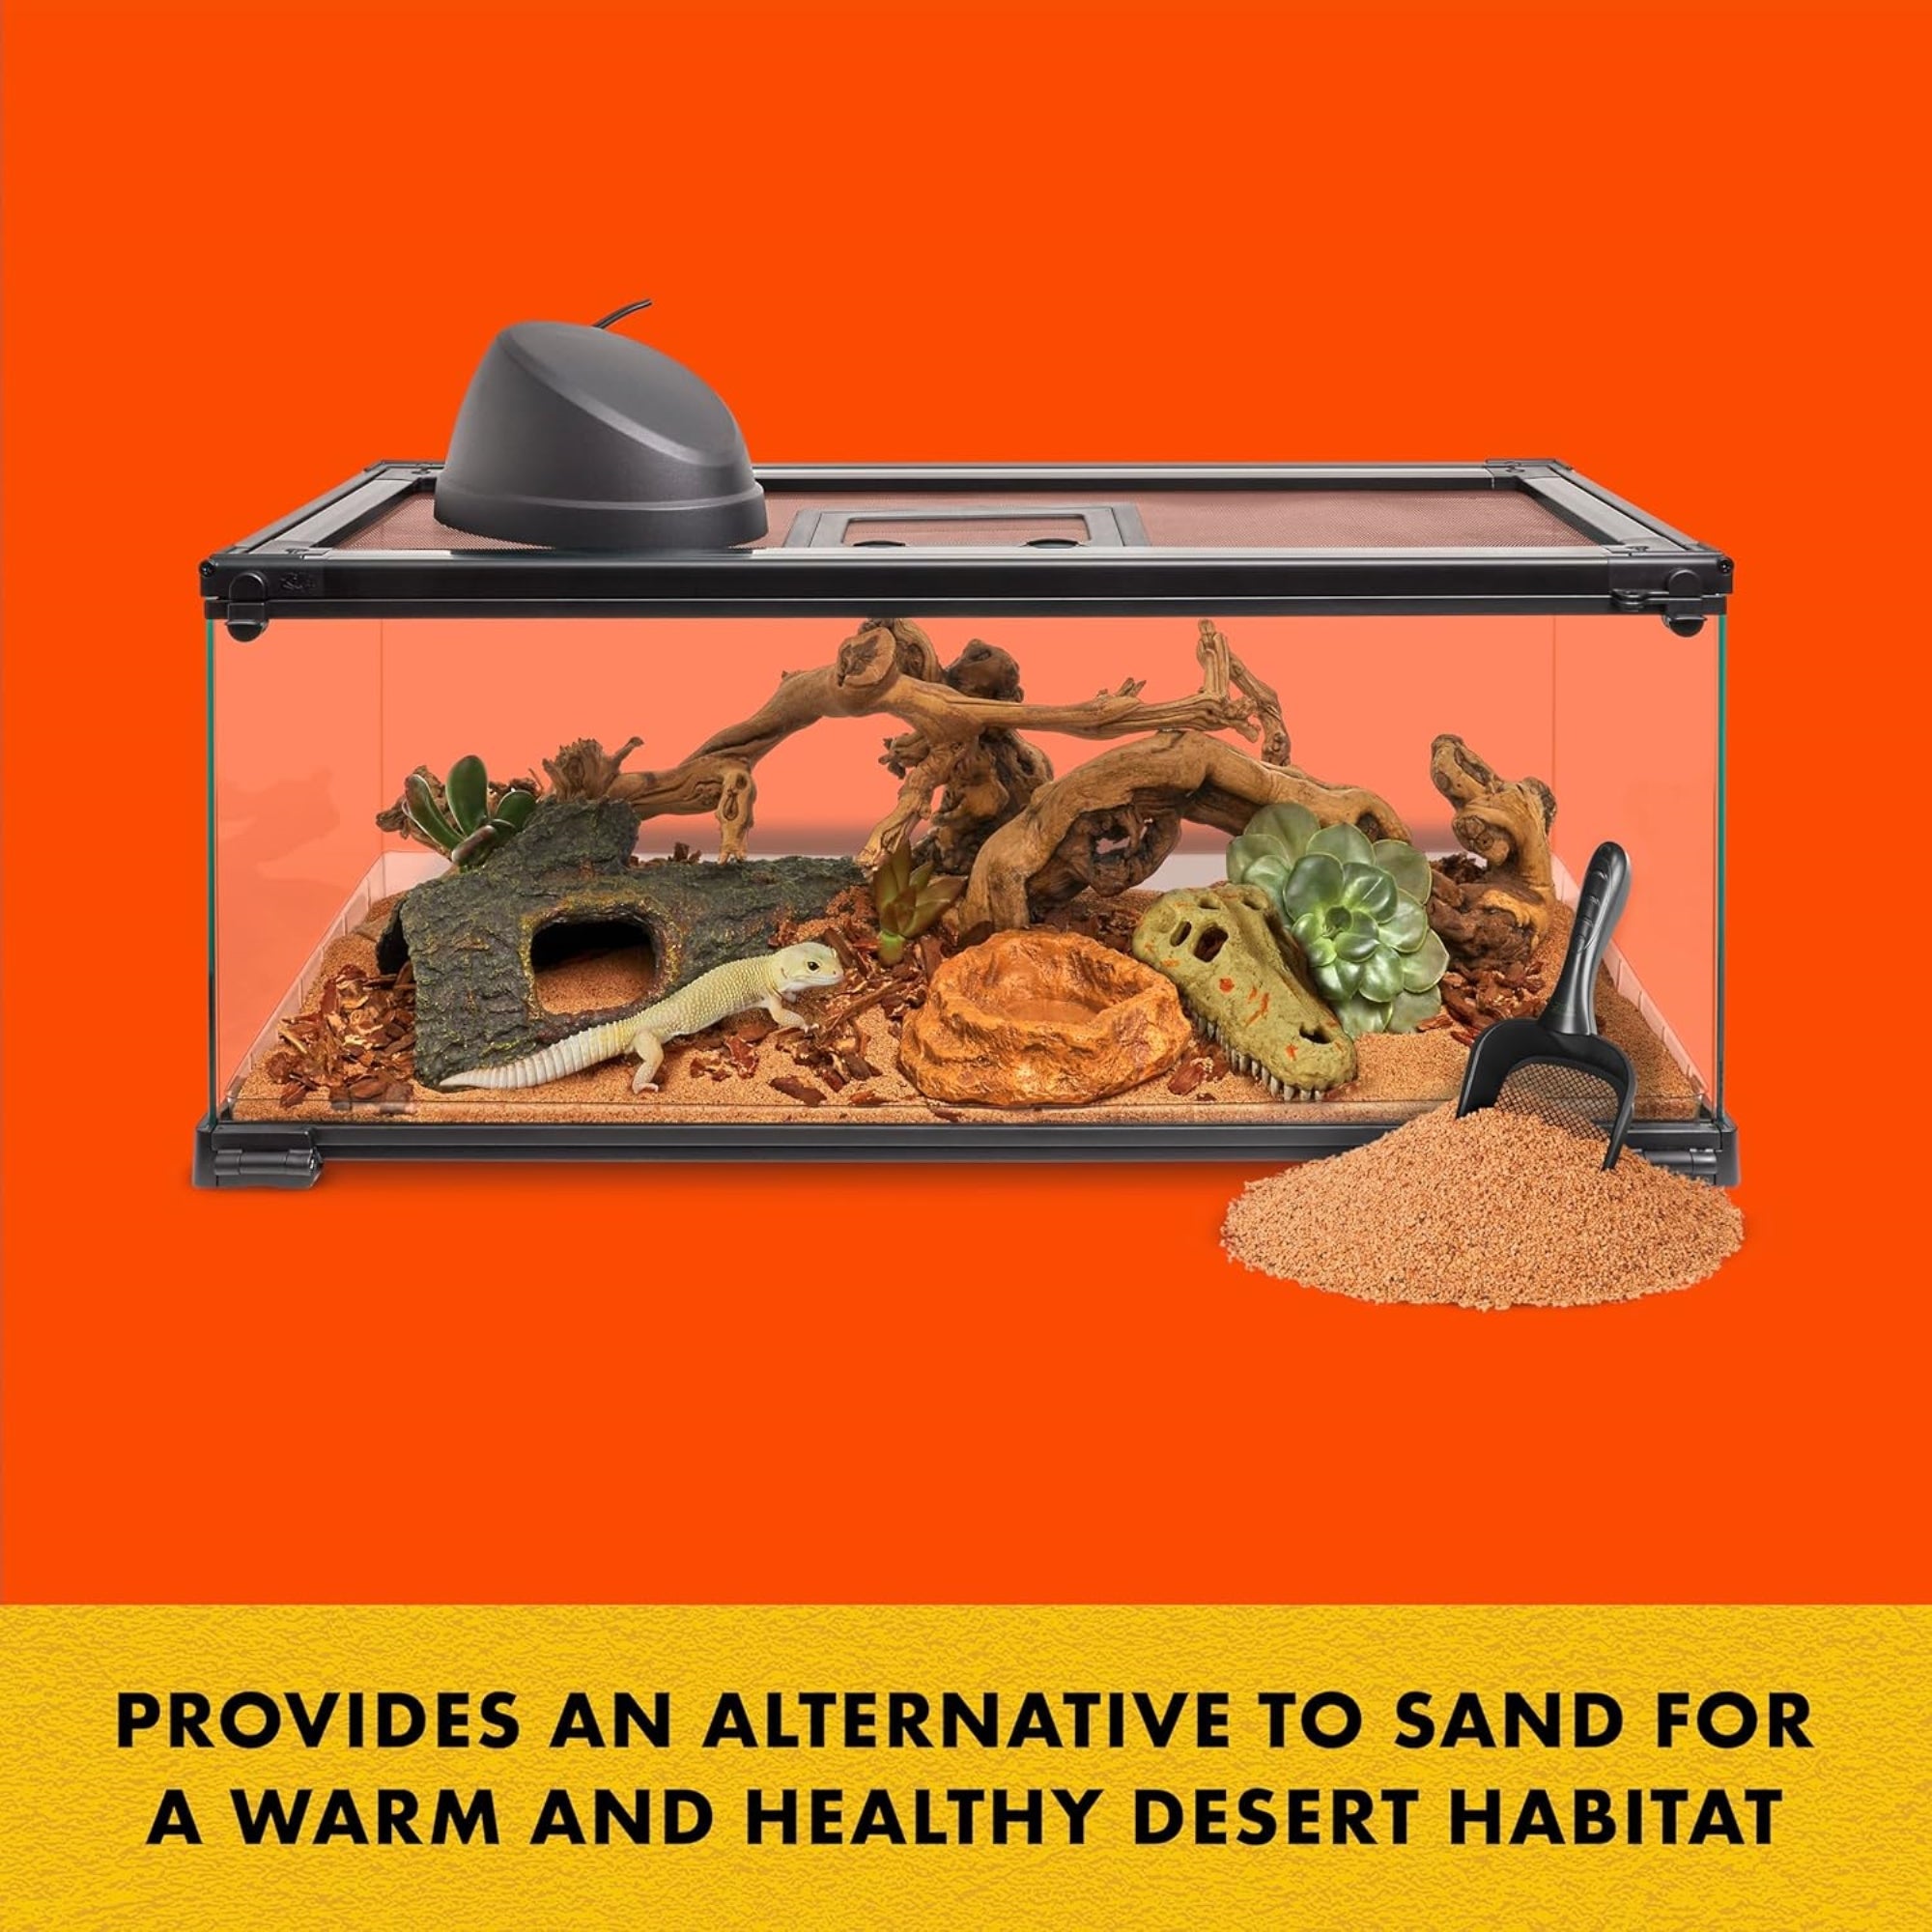 Zilla Desert Blend Substrate, Made with 100% English Walnut Shells, Ideal for Desert Reptiles, 10qt